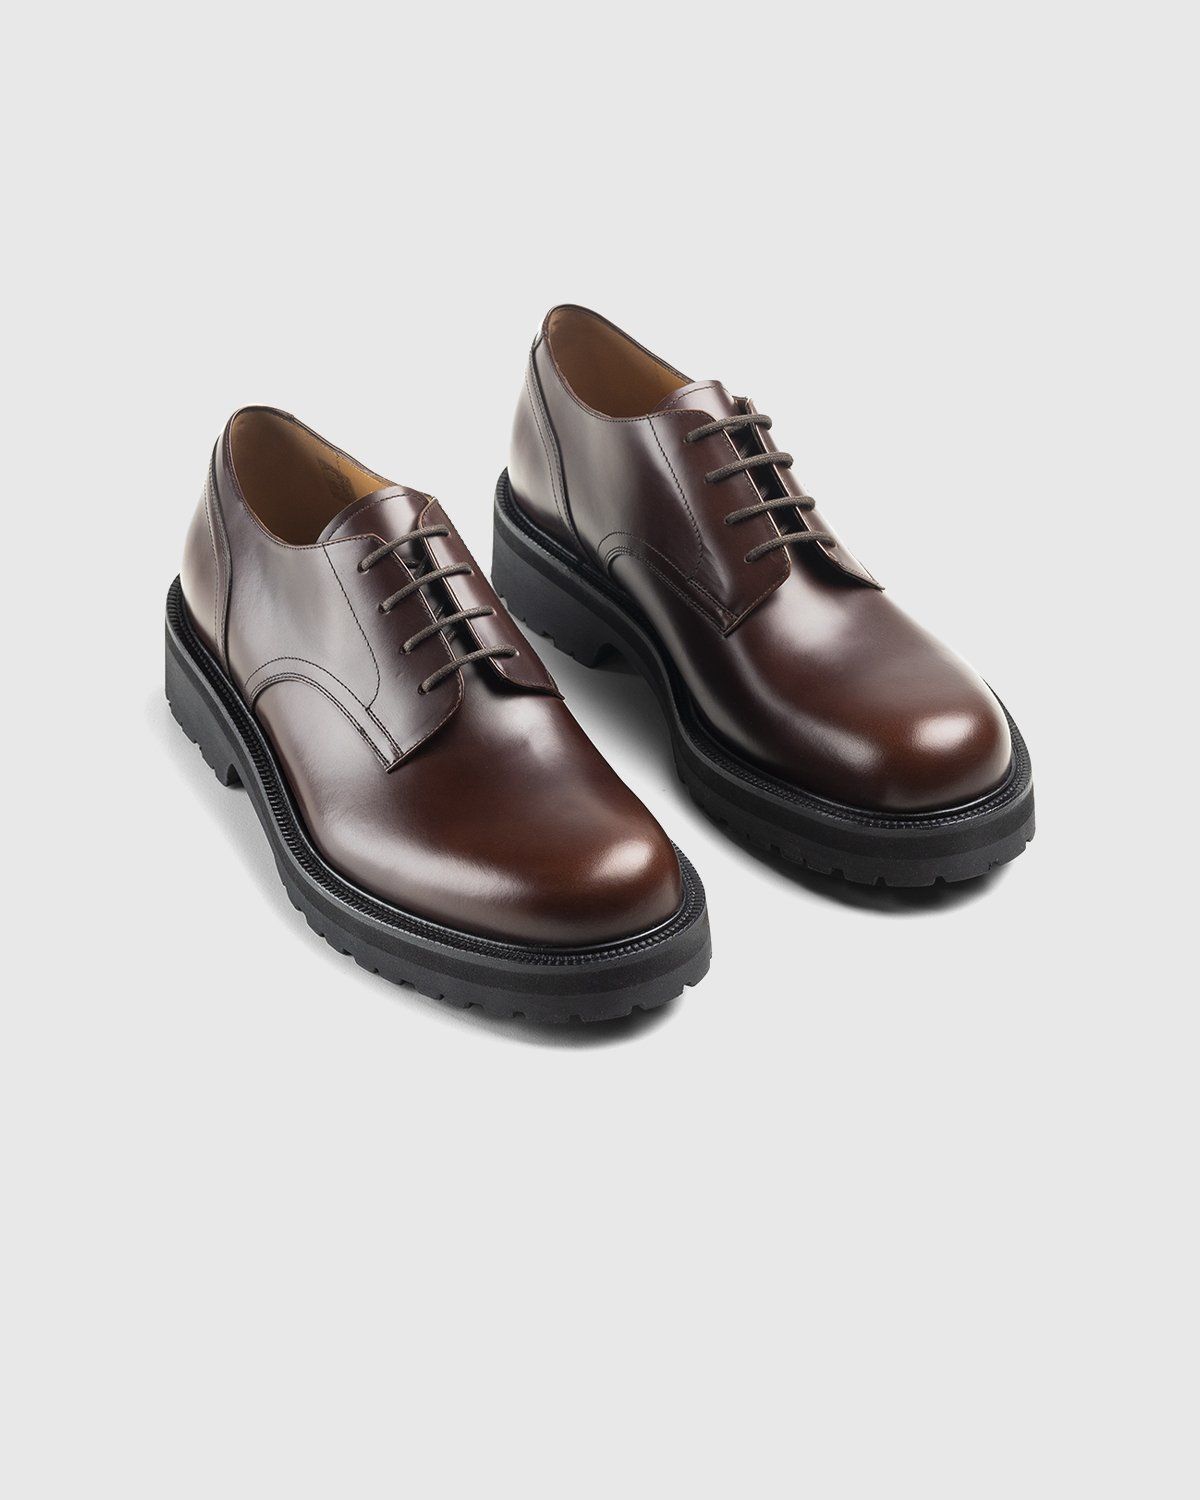 Dries van Noten – Leather Lace-Up Derby Shoes Brown - Oxfords & Lace Ups - Brown - Image 3